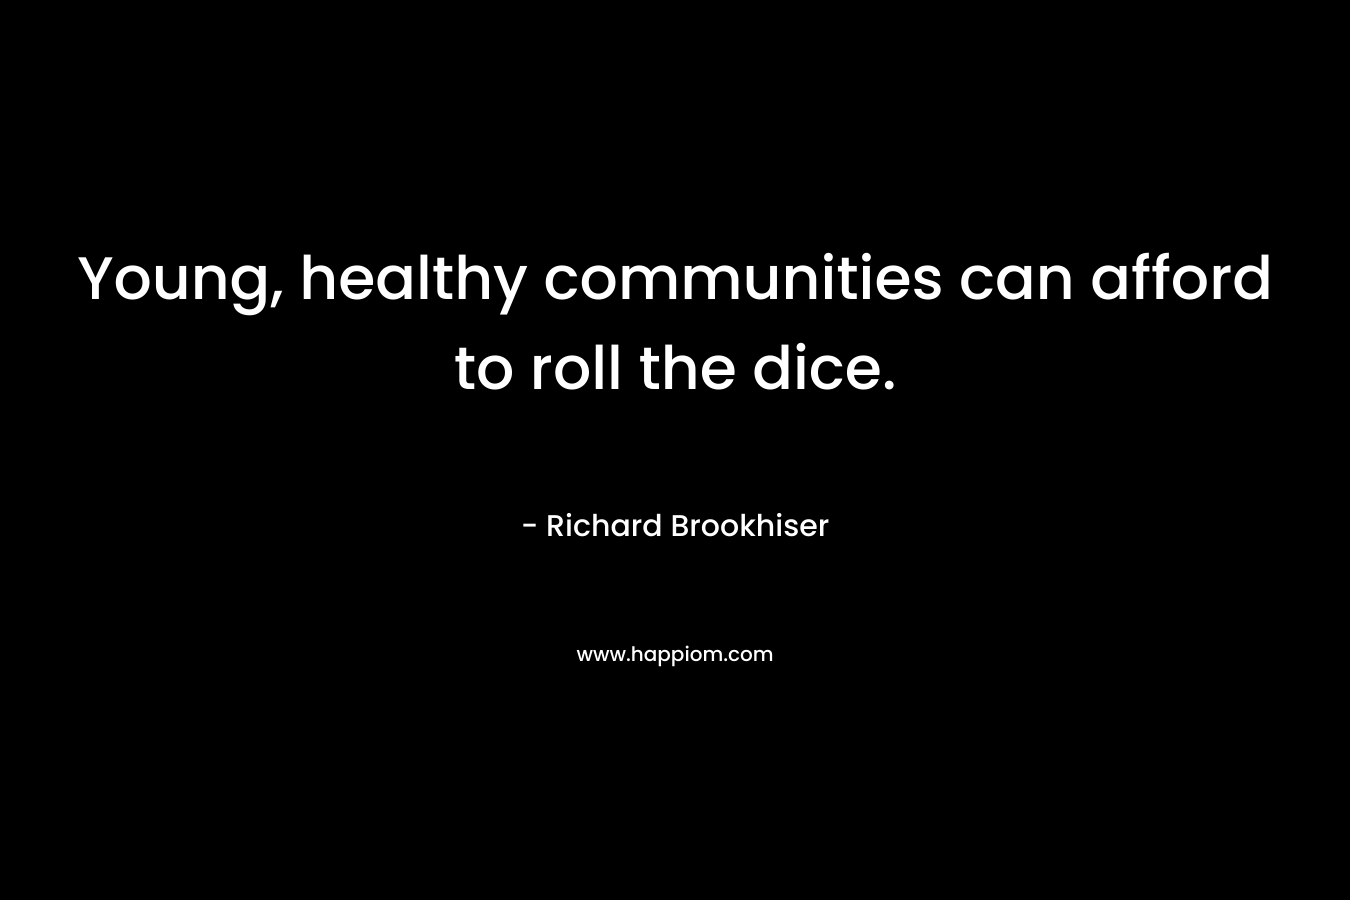 Young, healthy communities can afford to roll the dice.